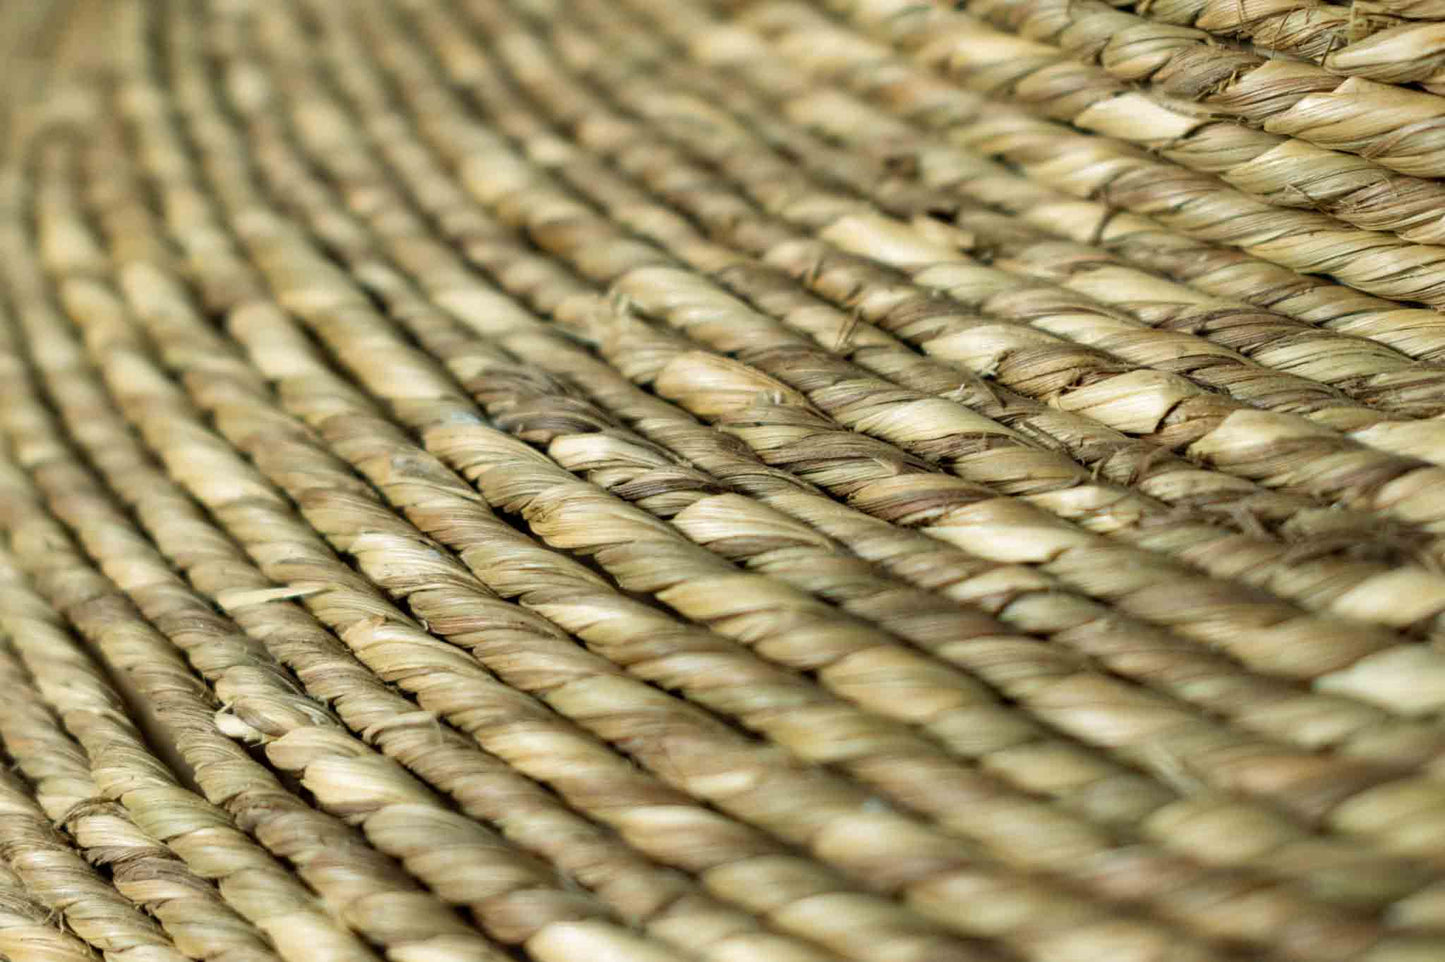 Handmade natural seagrass rope vessel up-close view of material.